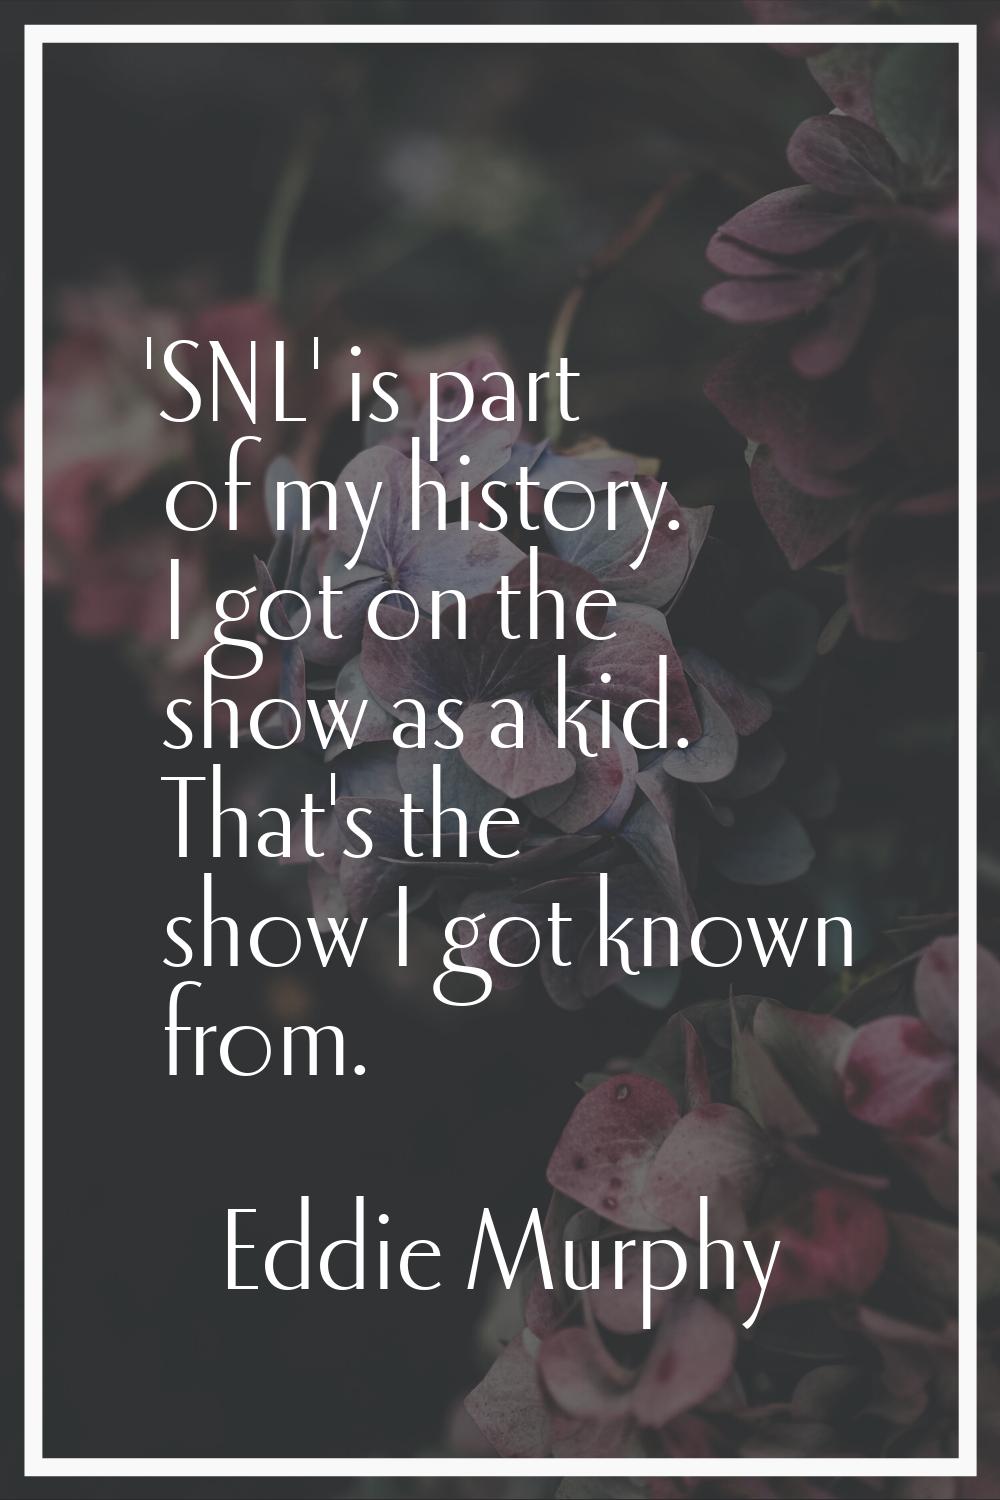 'SNL' is part of my history. I got on the show as a kid. That's the show I got known from.